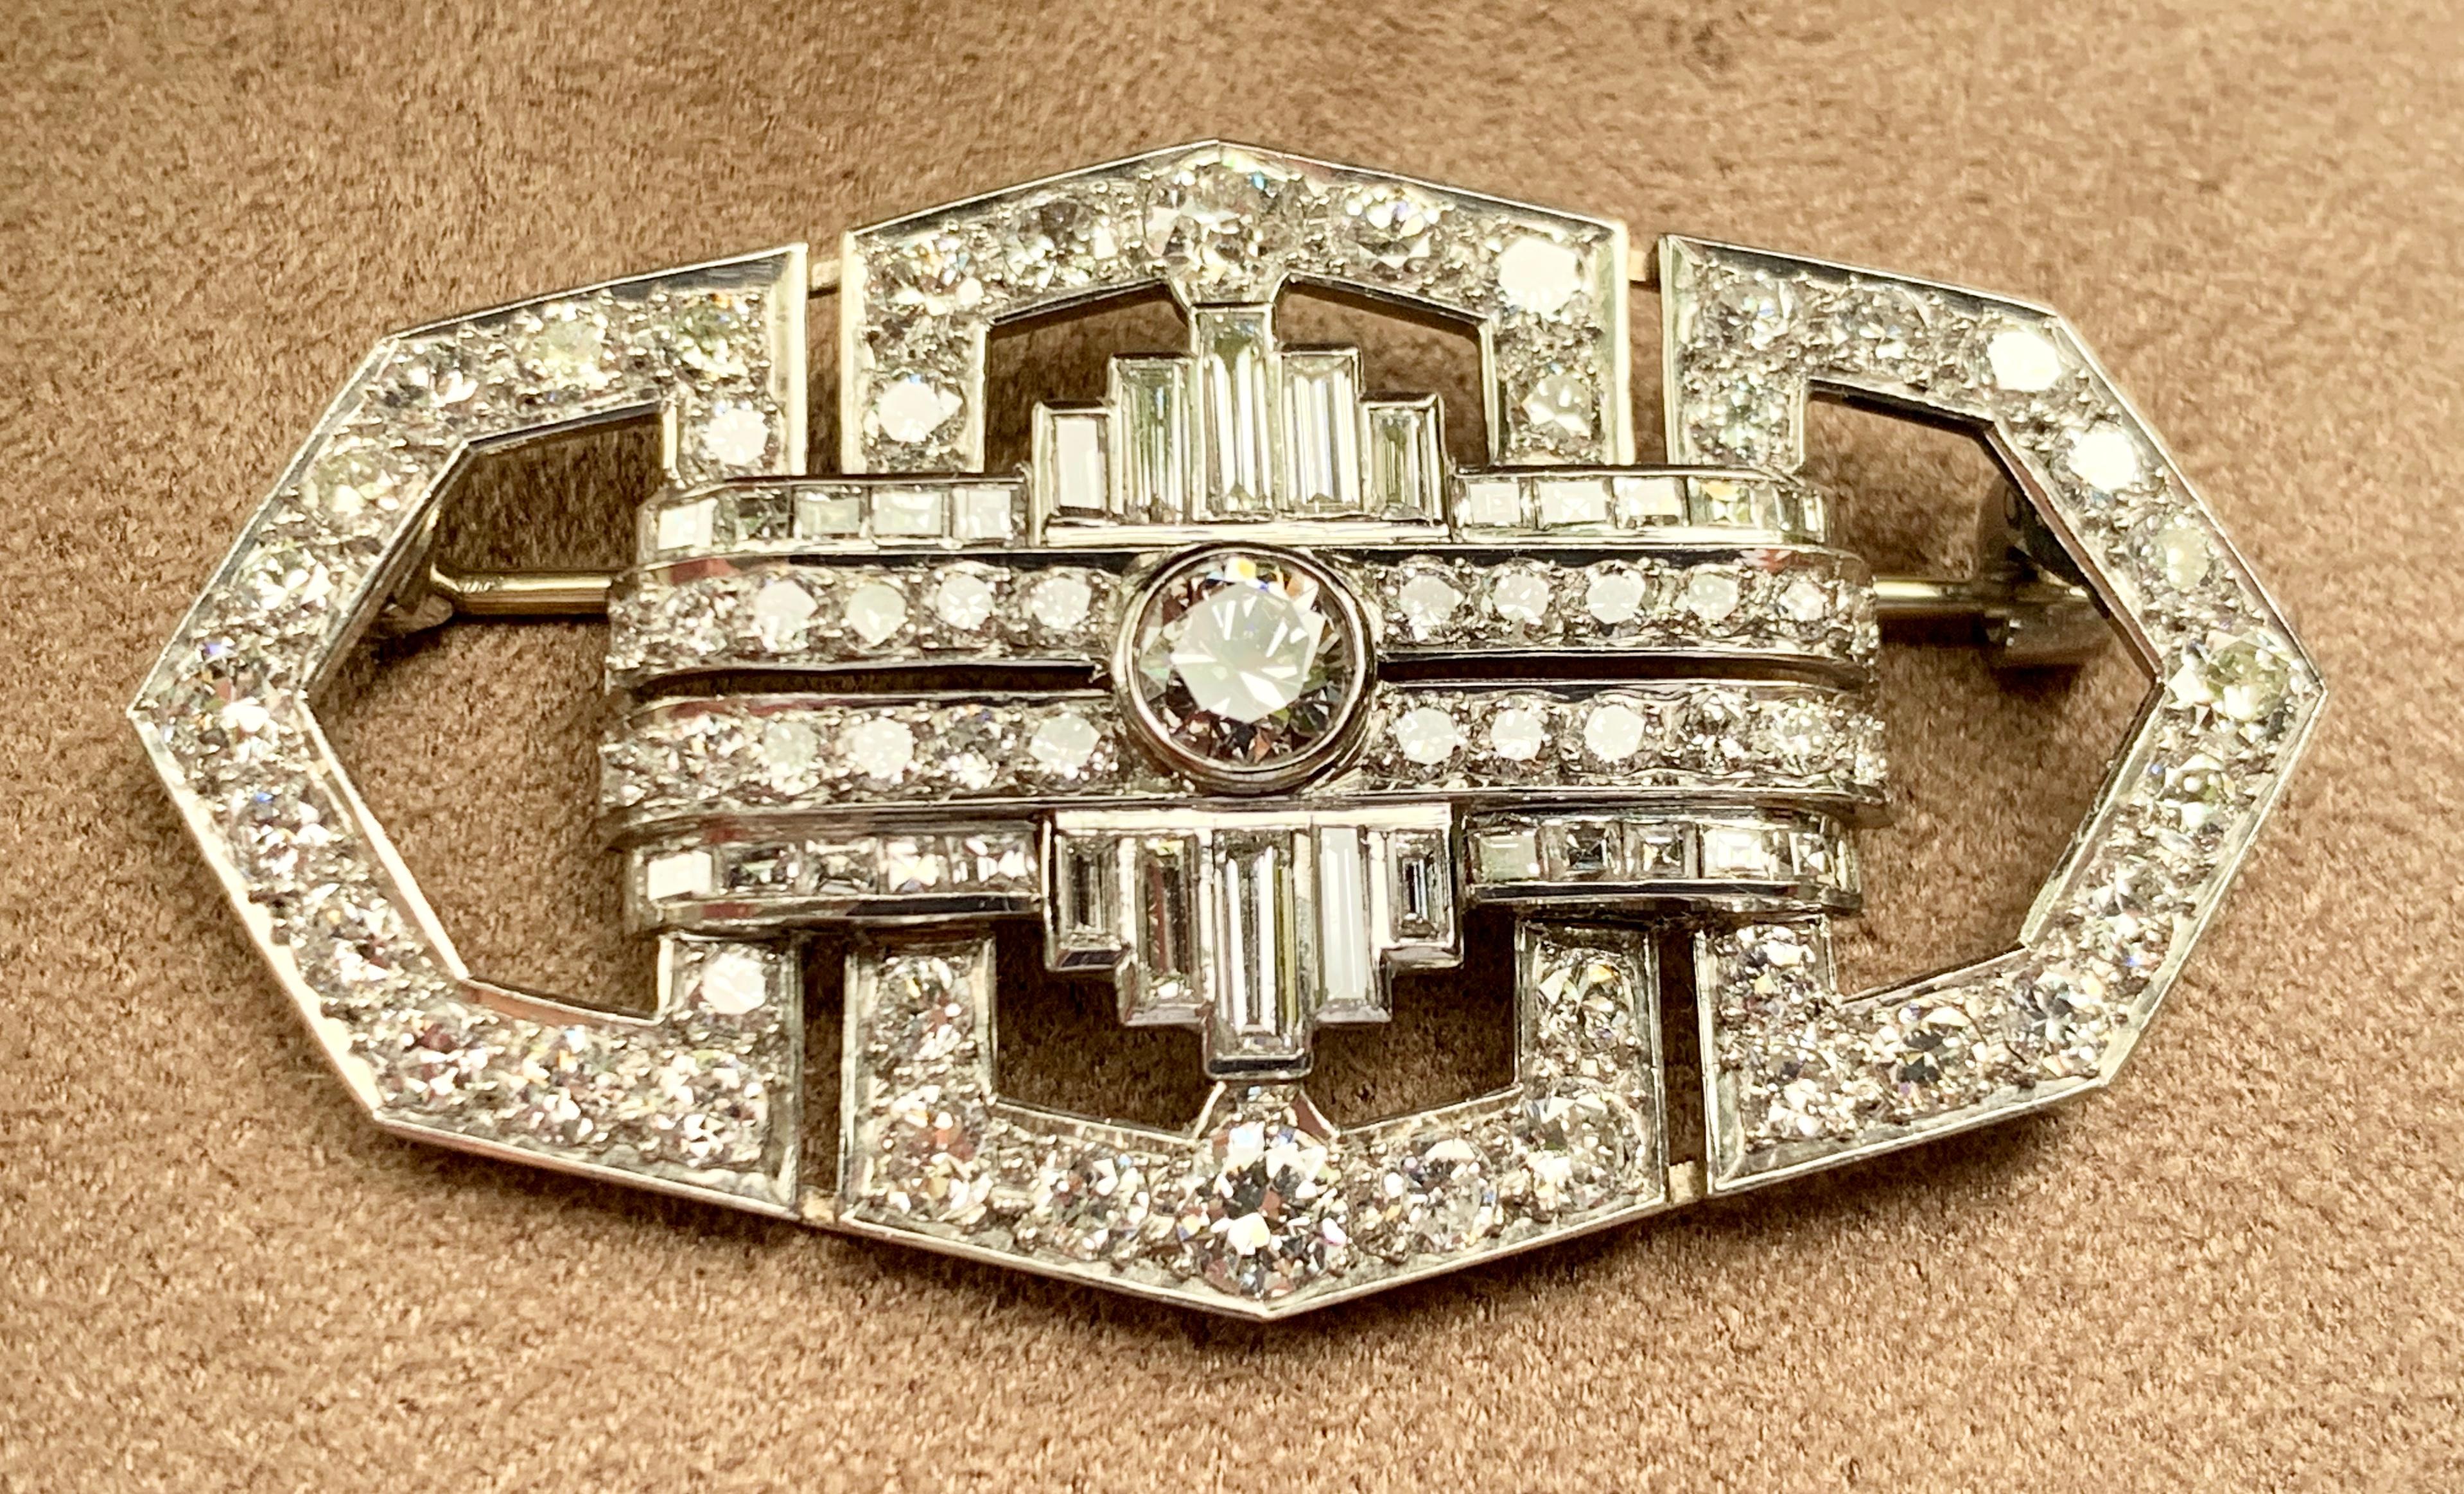 A classic 1920's  Art Deco diamond brooch in platinum; designed as a geometrically structured plaque around a central old mine European-cut diamond.   Approximately 4.6 cm long and set with approximately 5 carats of baguette and brilliant-cut